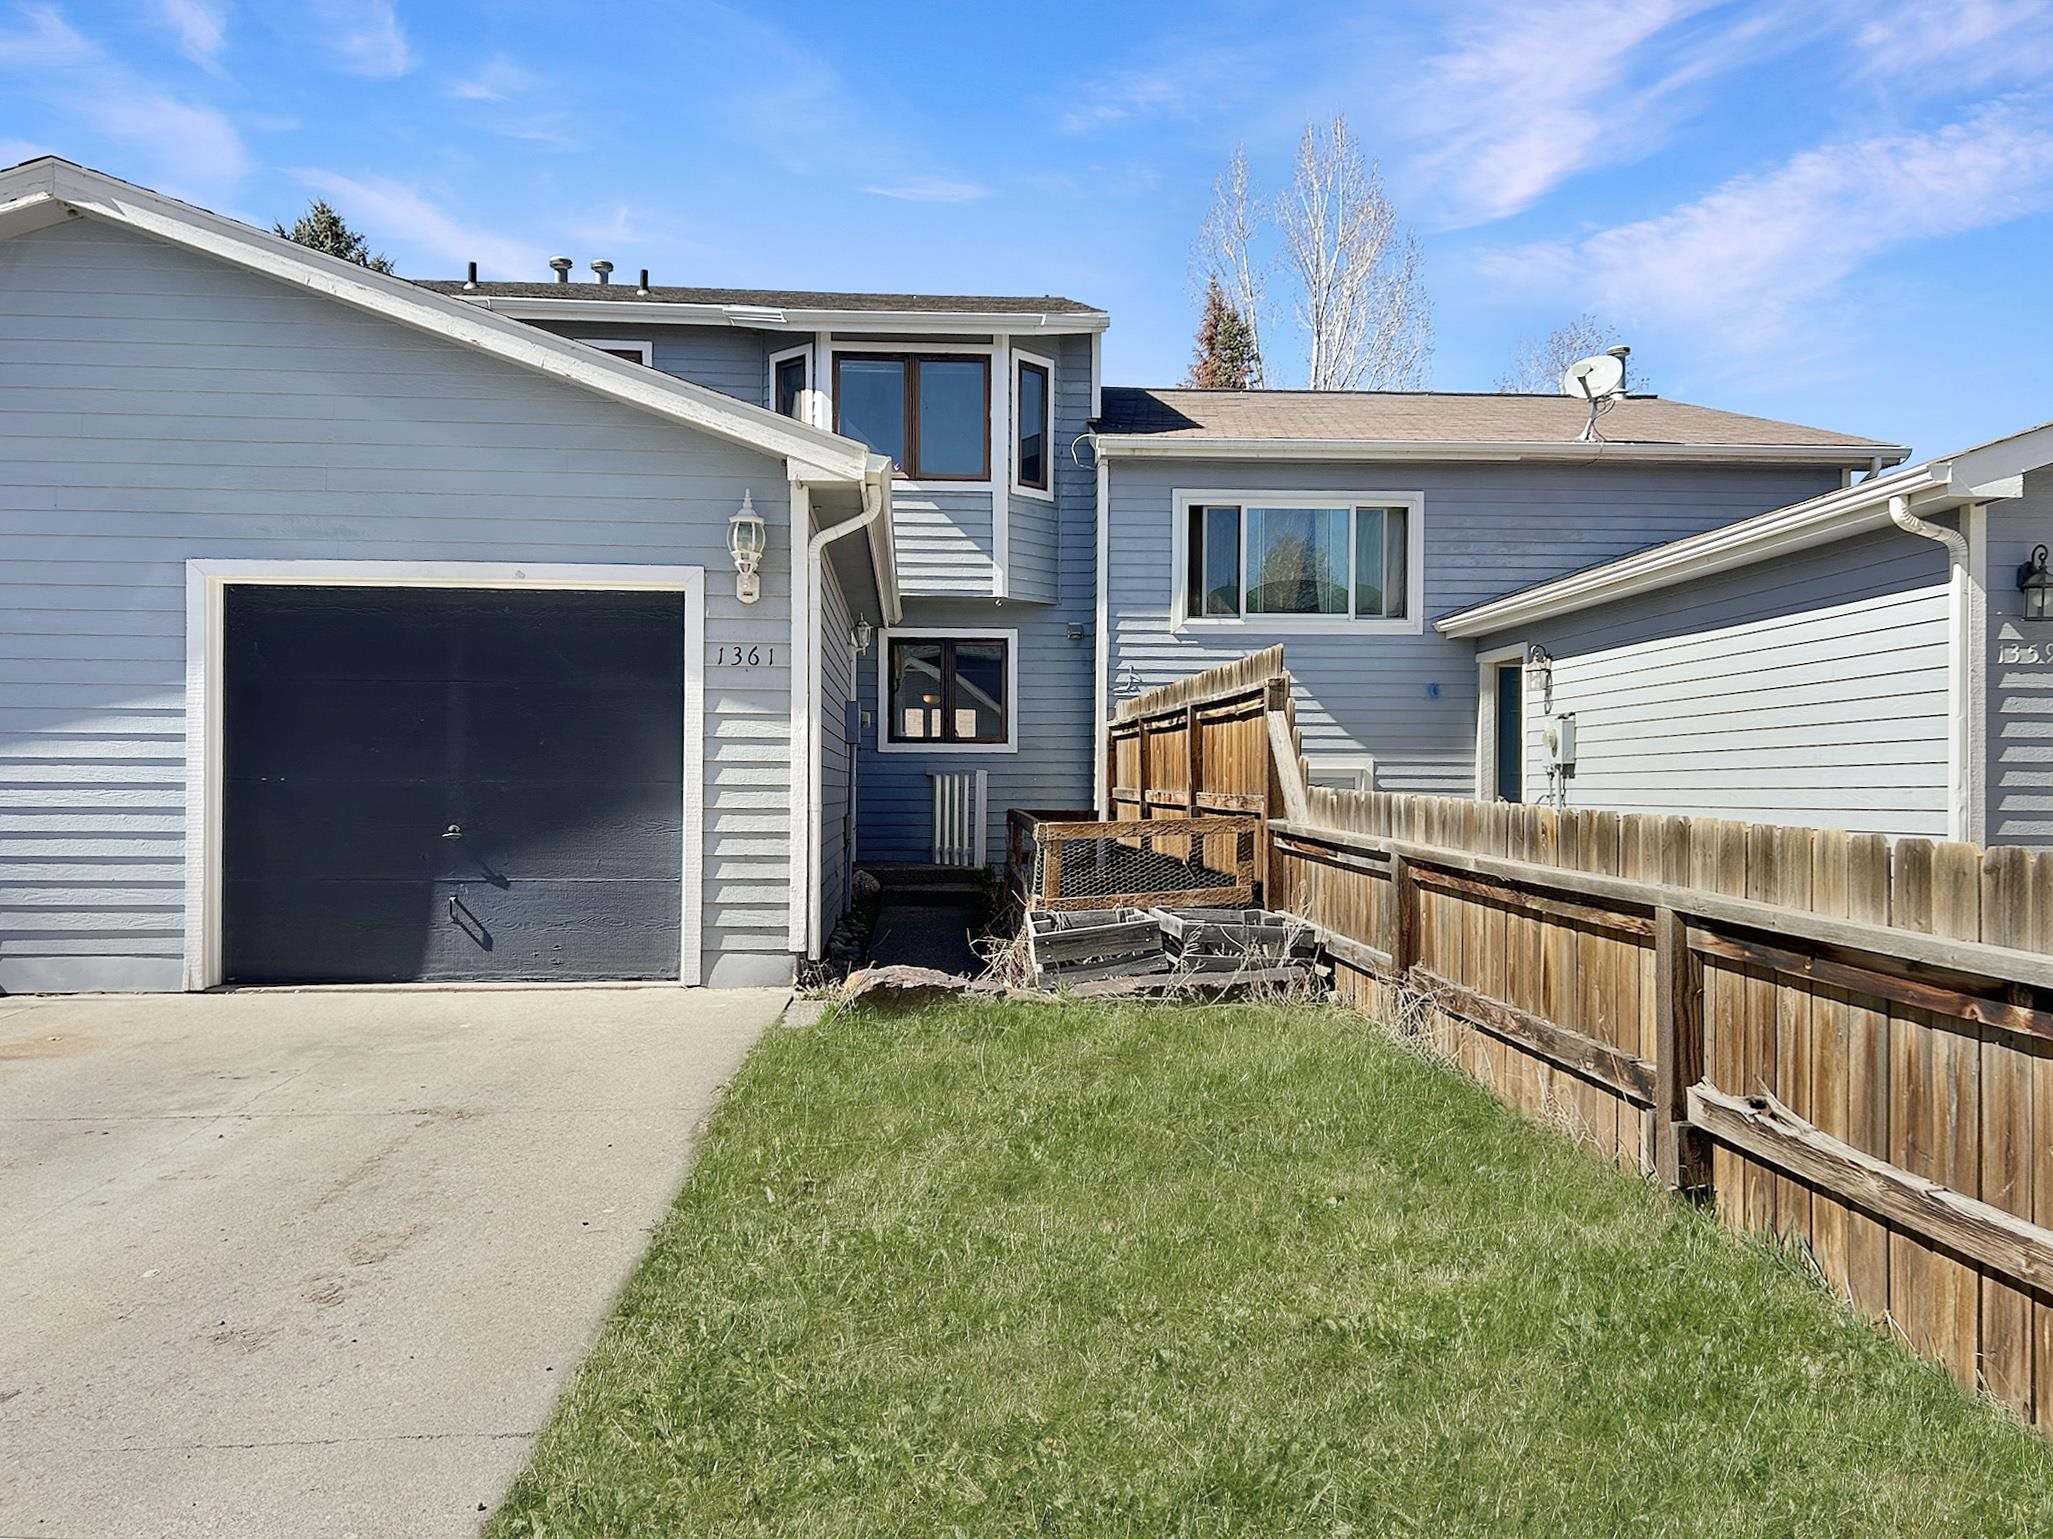 1361 Barber Drive, Carbondale, CO 